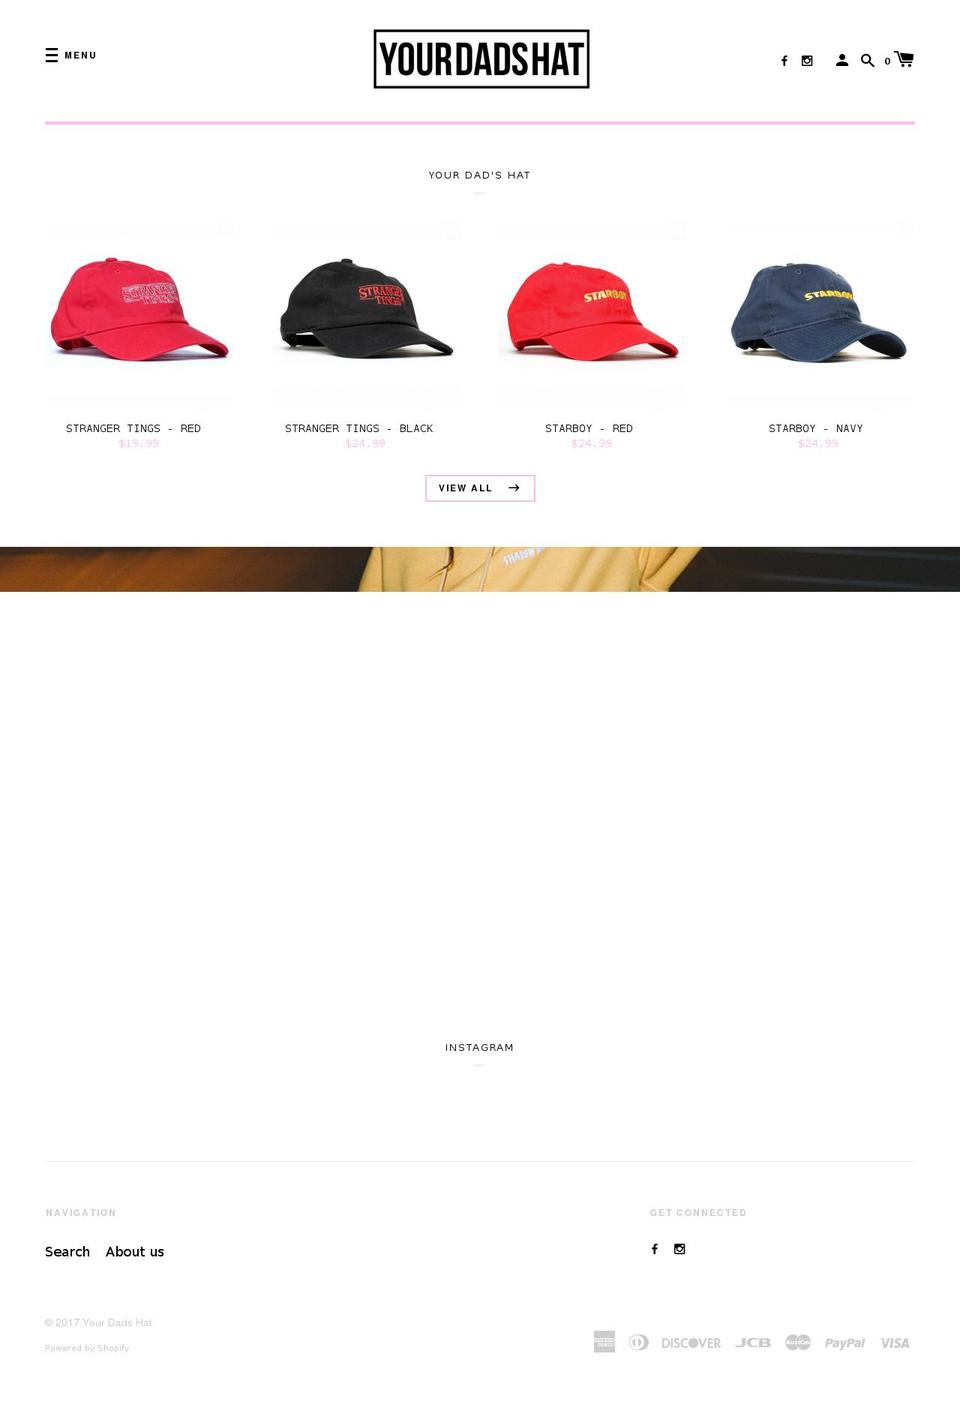 Craft Shopify theme site example yourdadshat.com